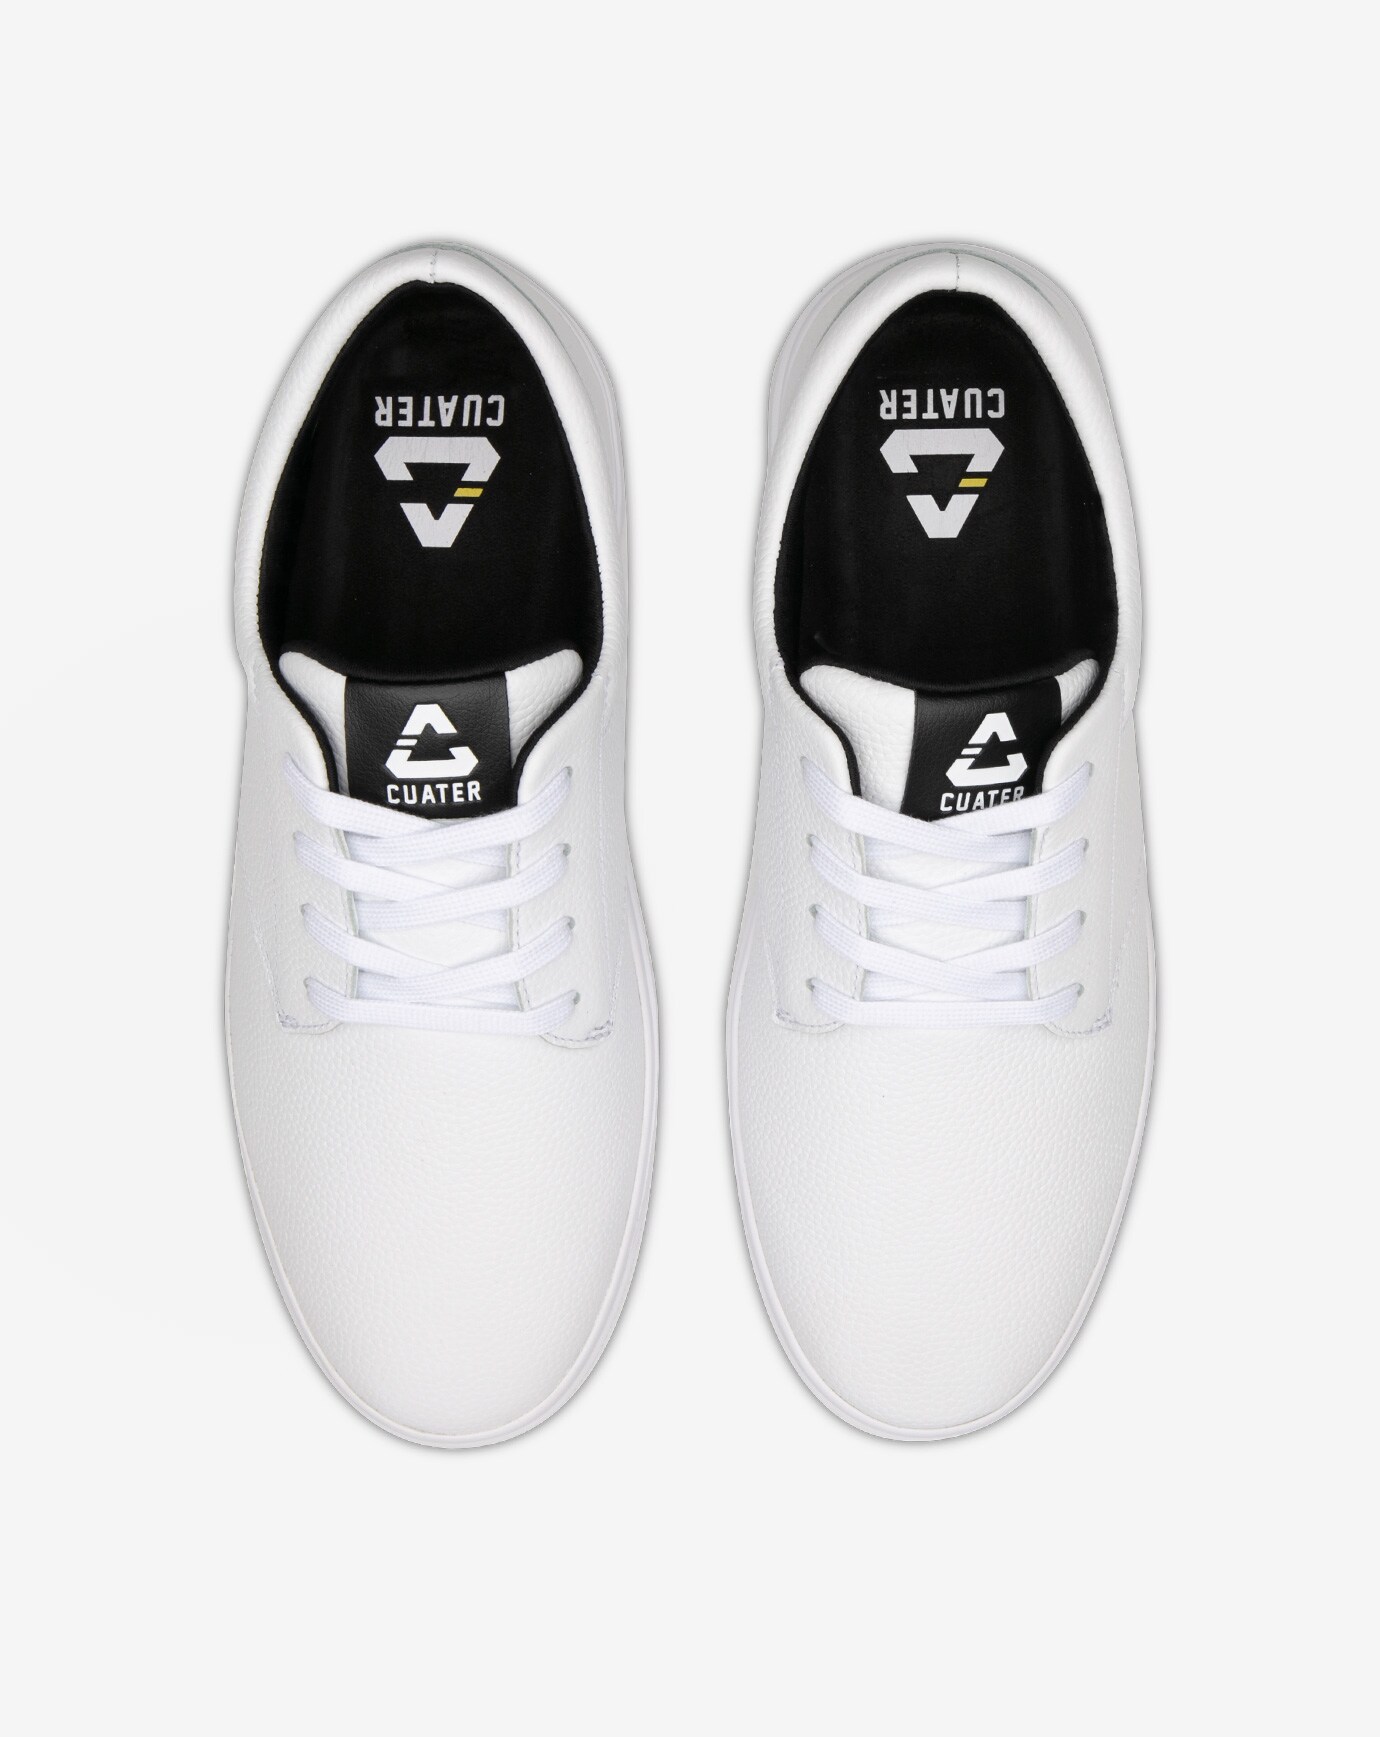 THE WILDCARD LEATHER SPIKELESS GOLF SHOE Image 4